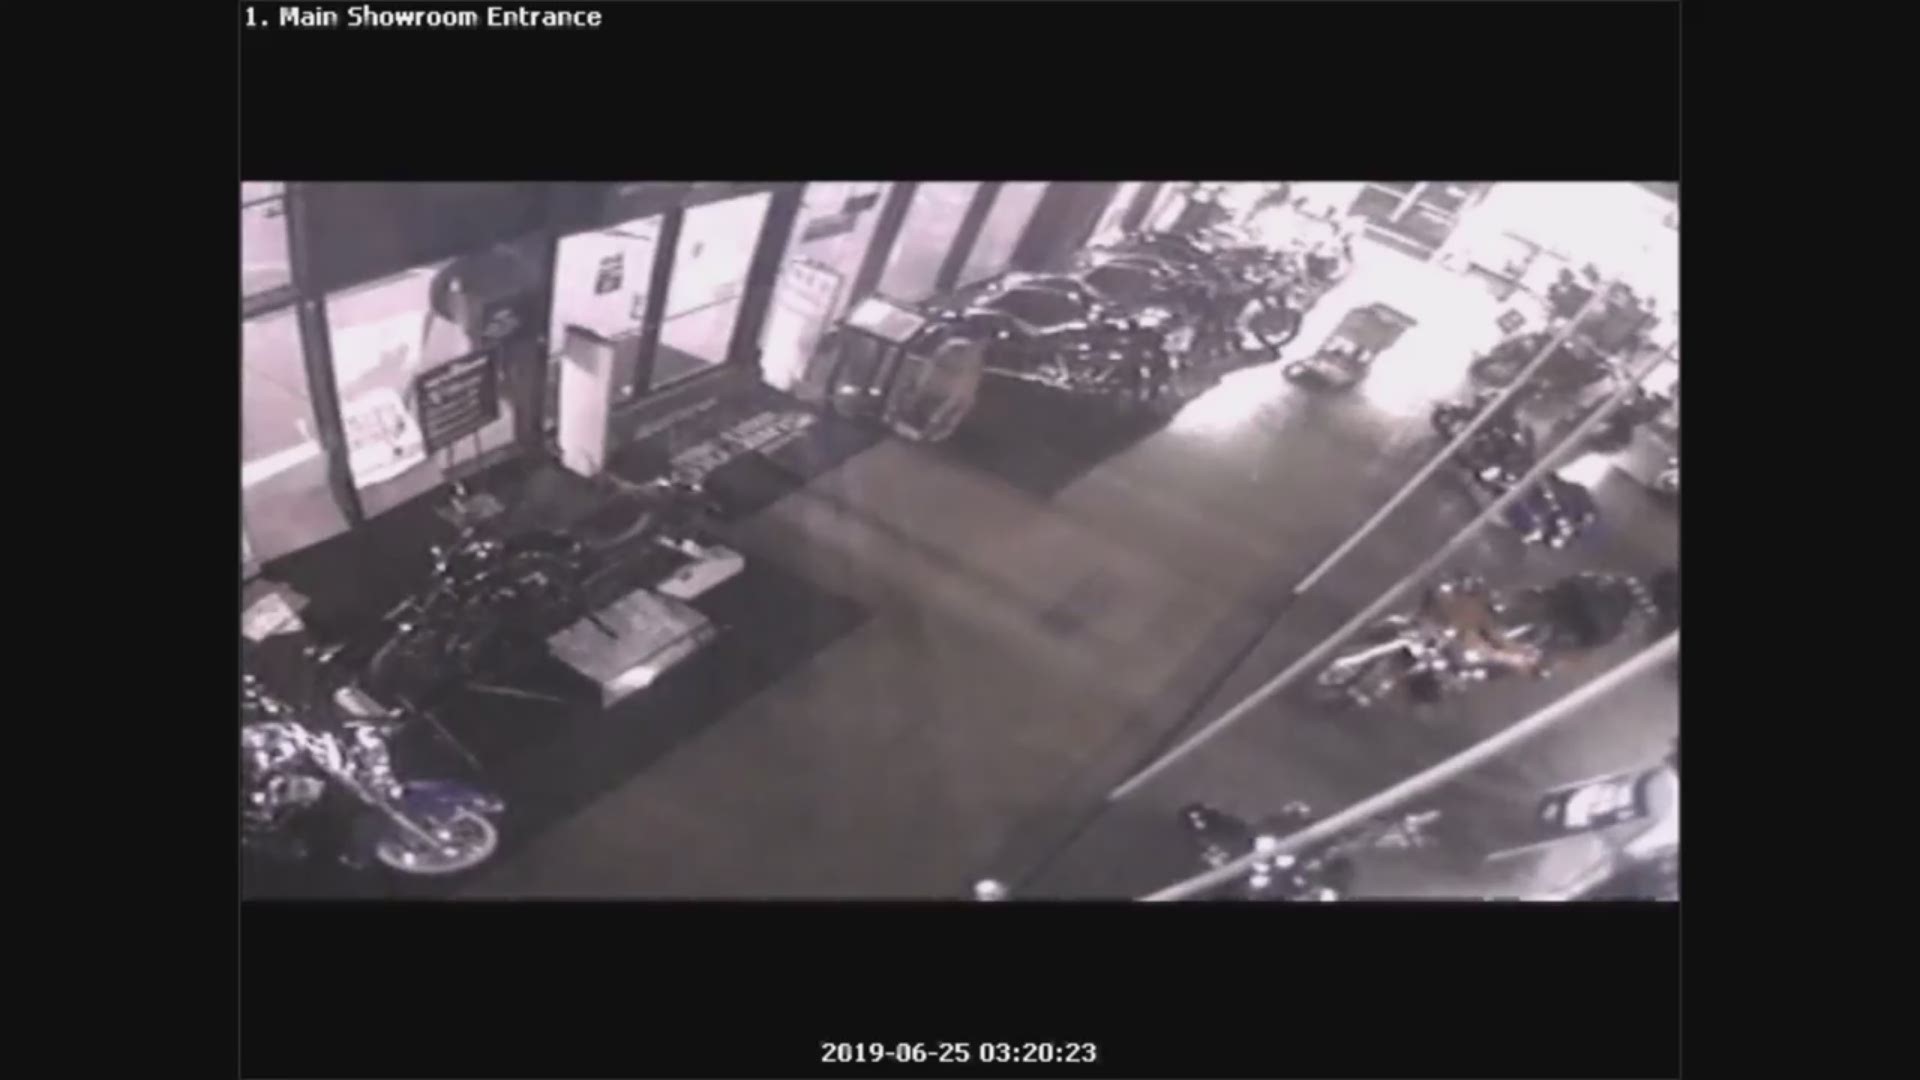 Gold Star Harley-Davidson released this security video of three people stealing motorcycles from their showroom.